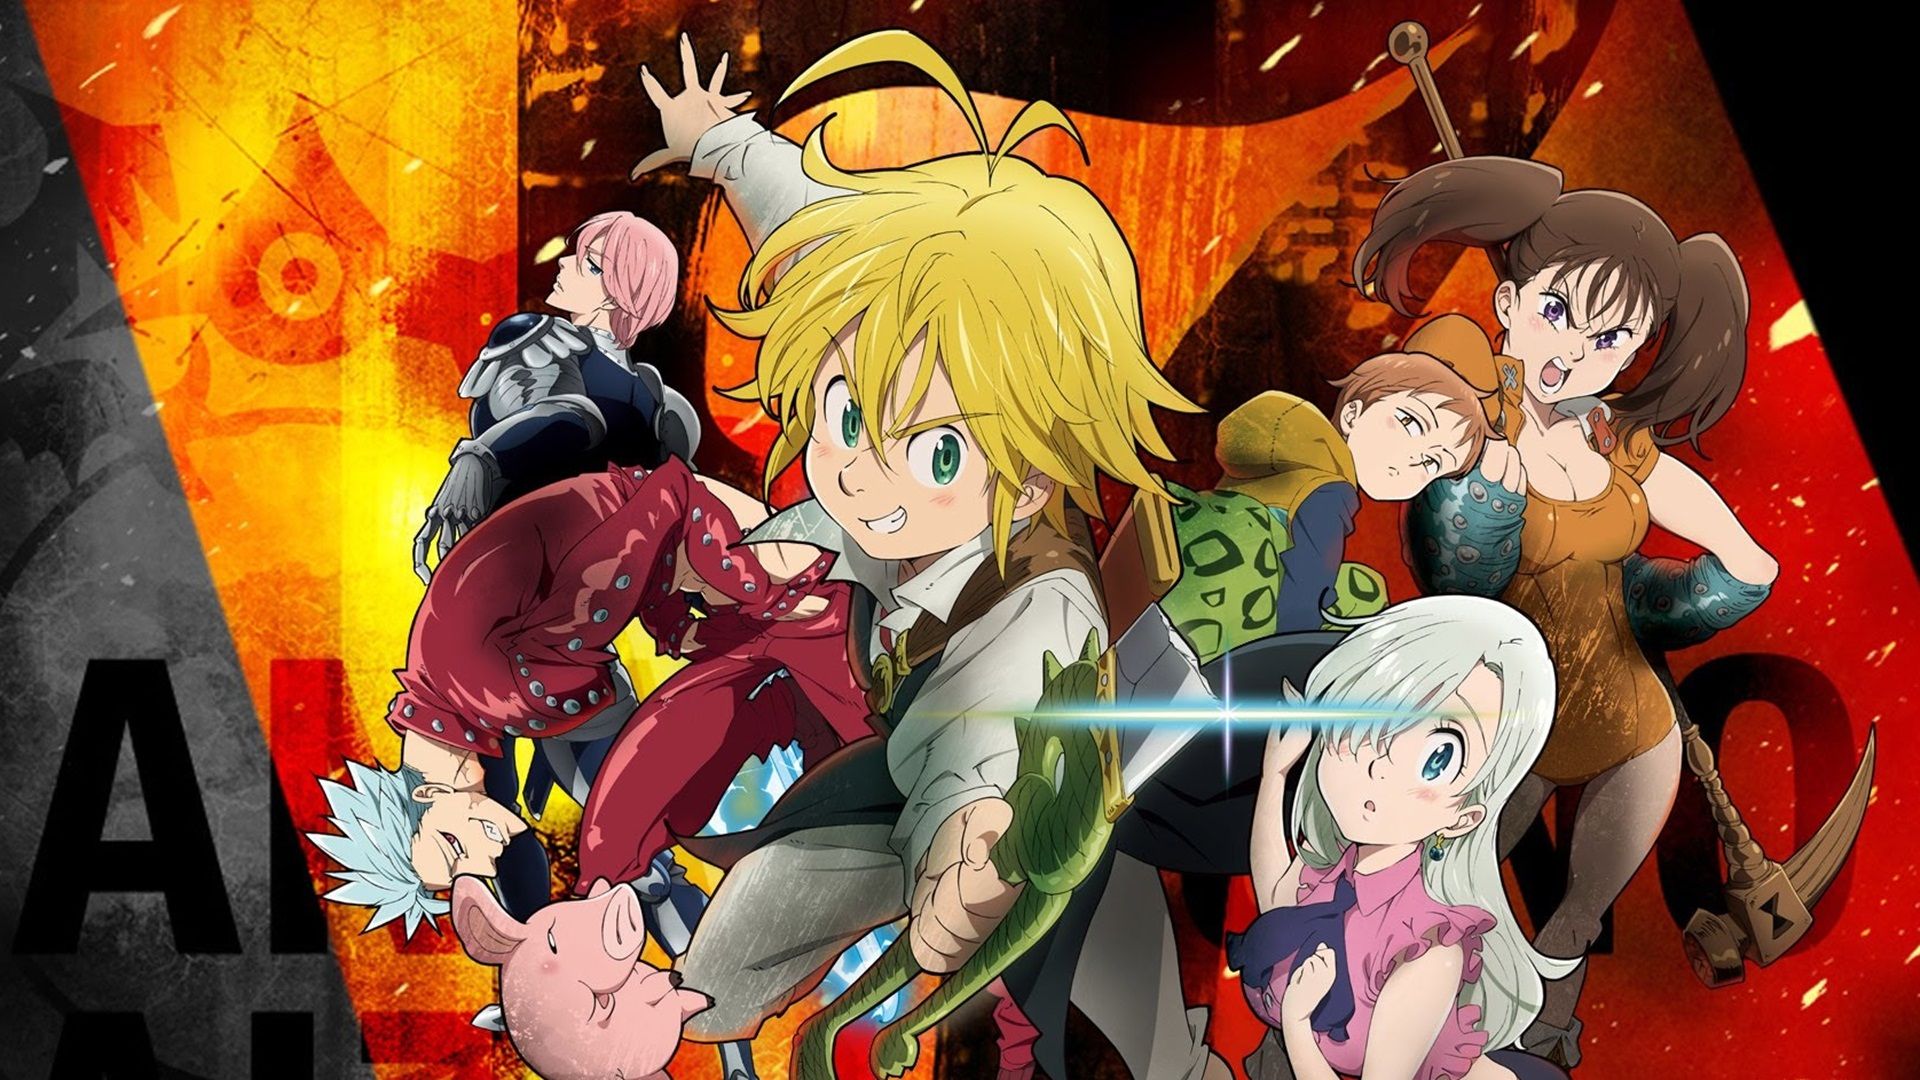 Free download Seven Deadly Sins Wallpapers Top Seven Deadly Sins